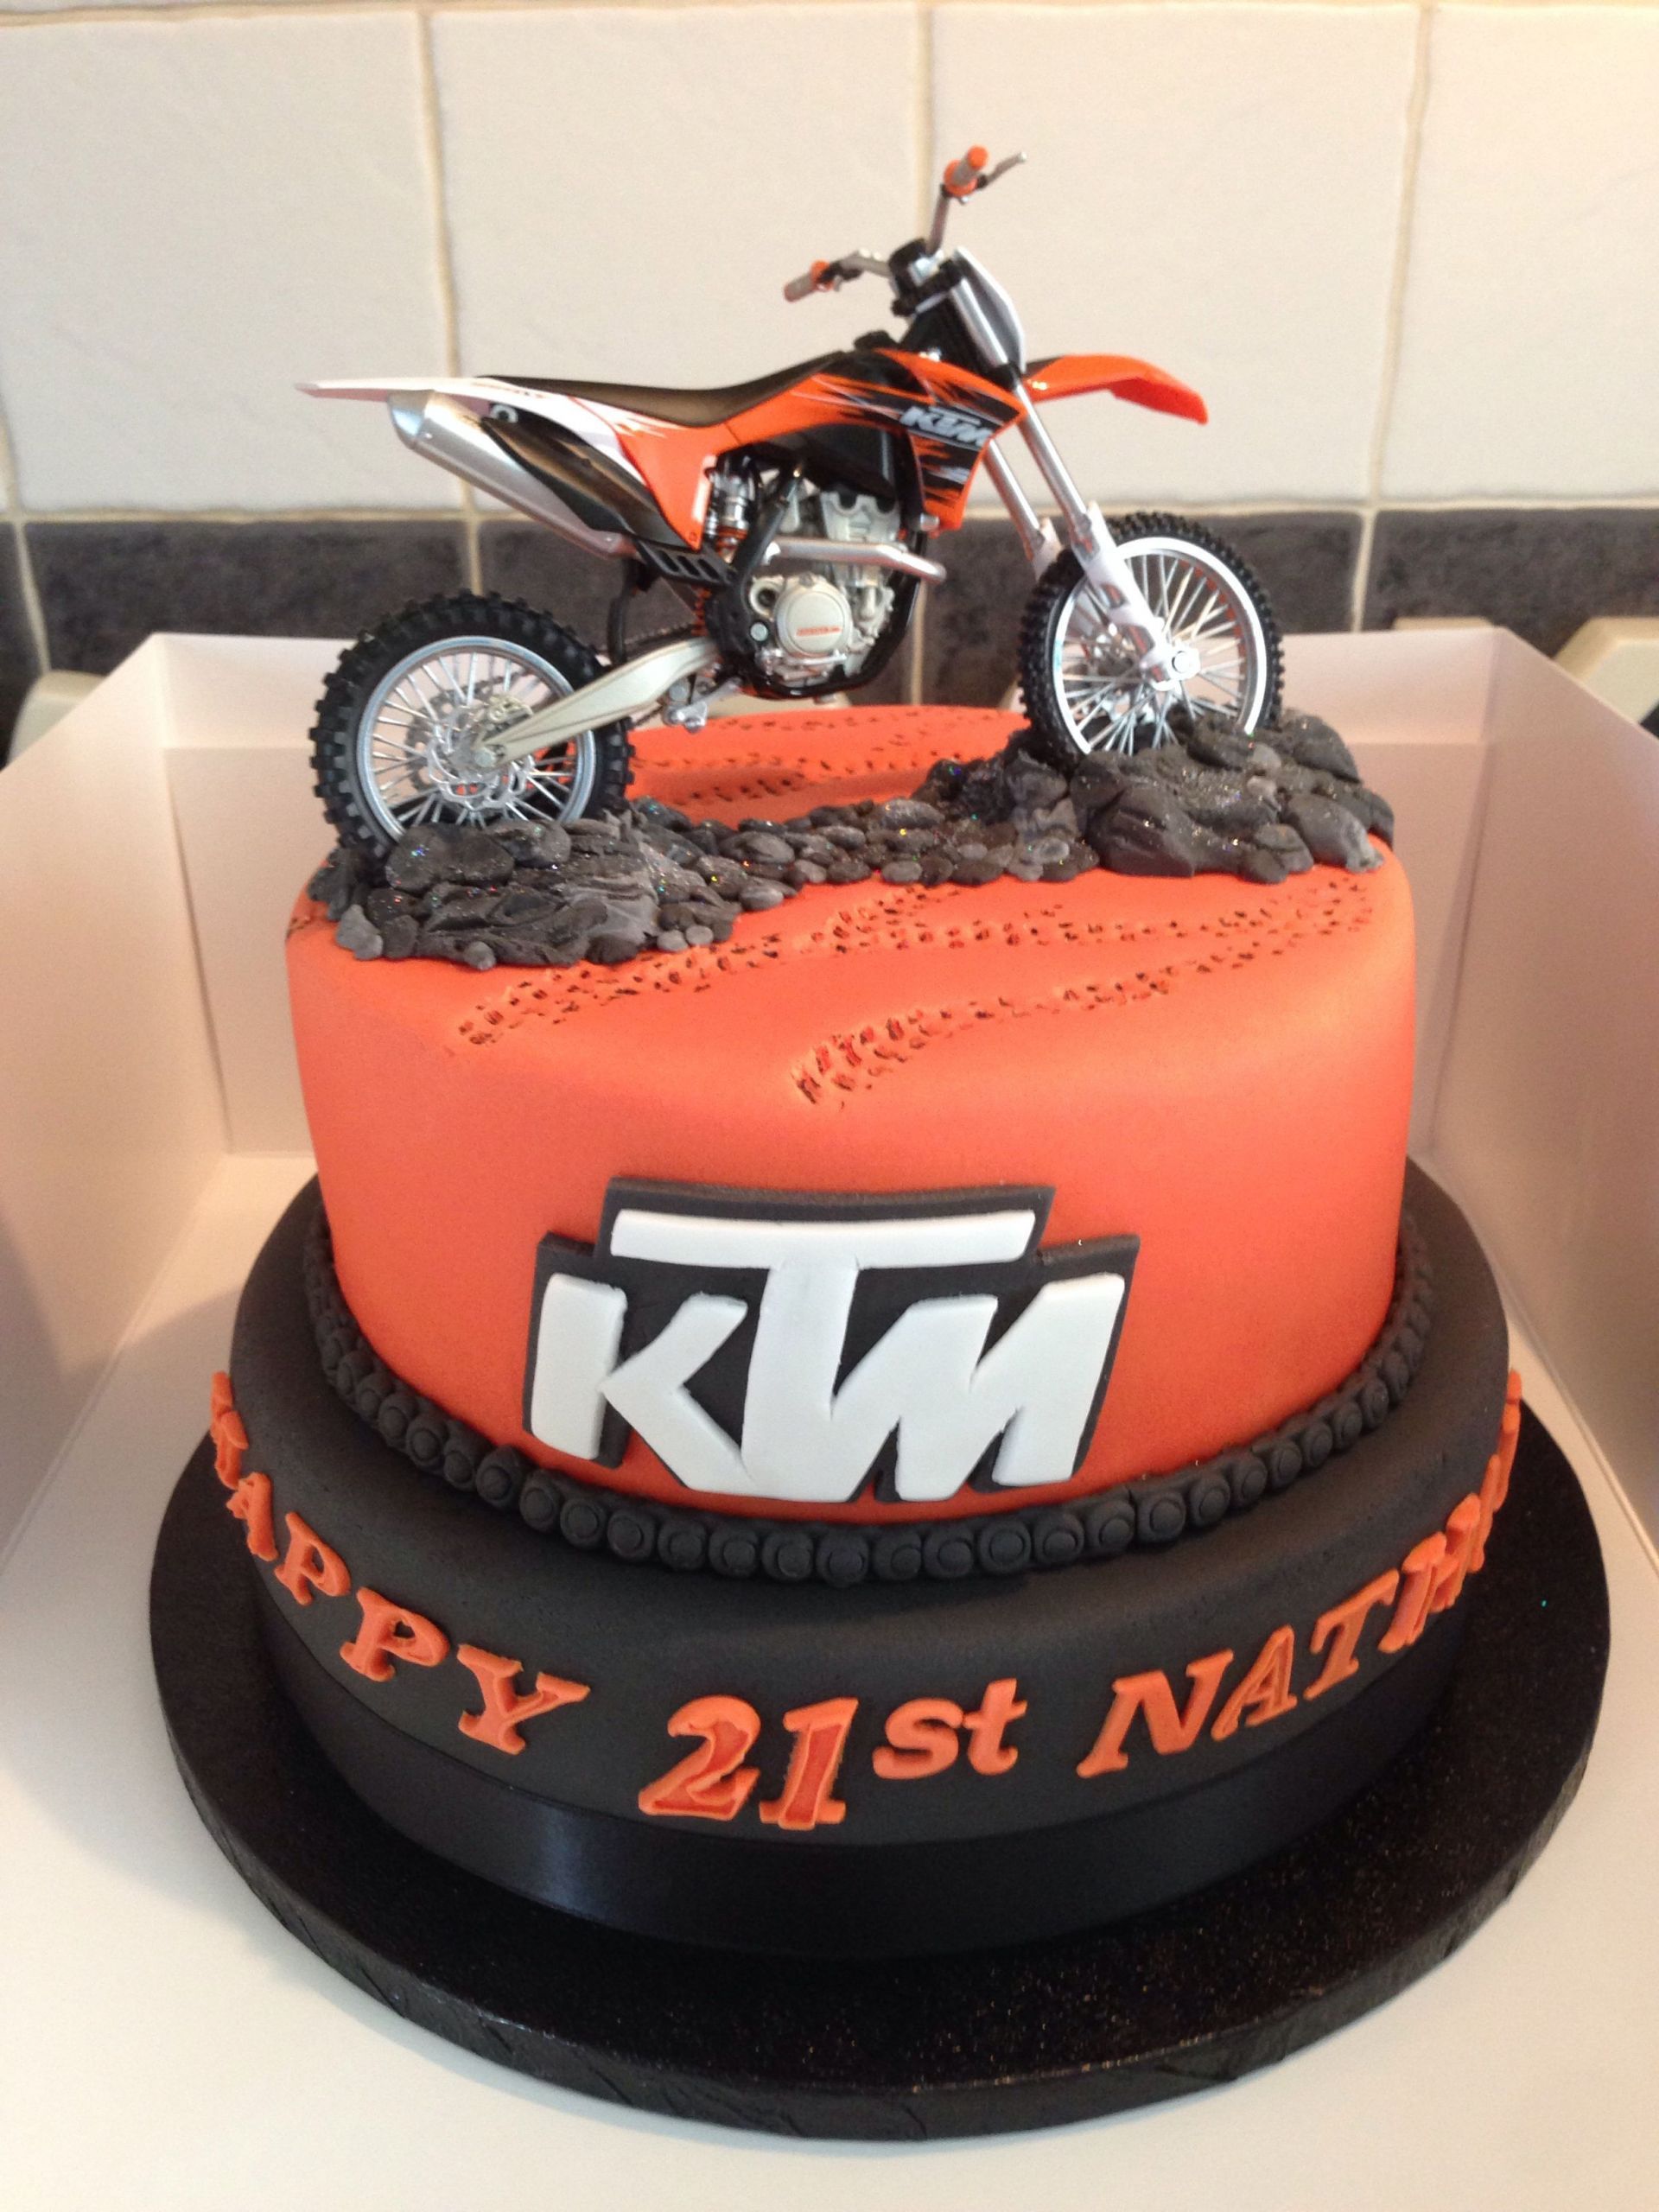 Dirt Bike Birthday Cakes
 Really awesome birthday cake with a KTM dirt bike on it